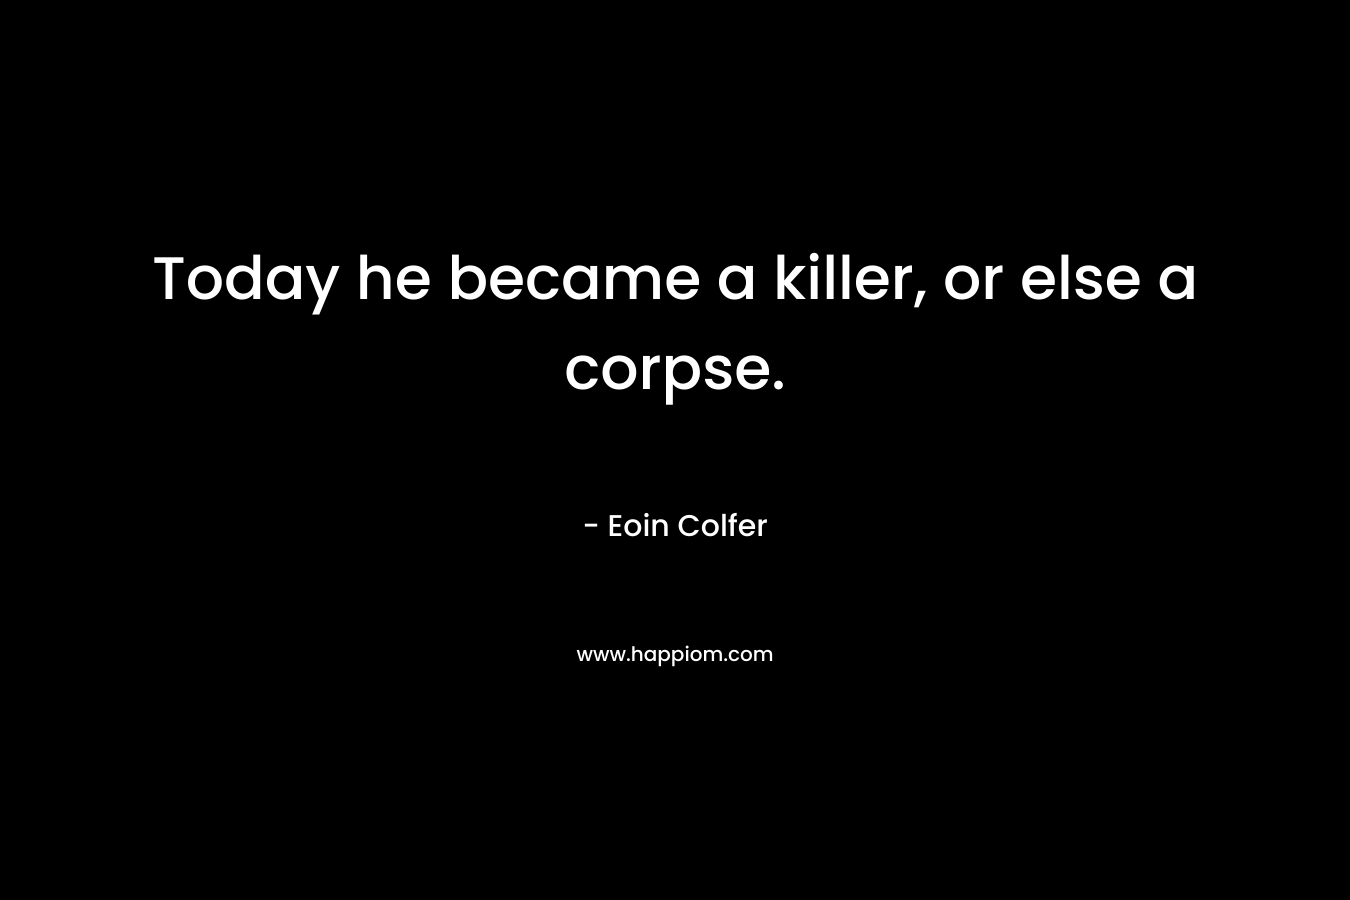 Today he became a killer, or else a corpse. – Eoin Colfer